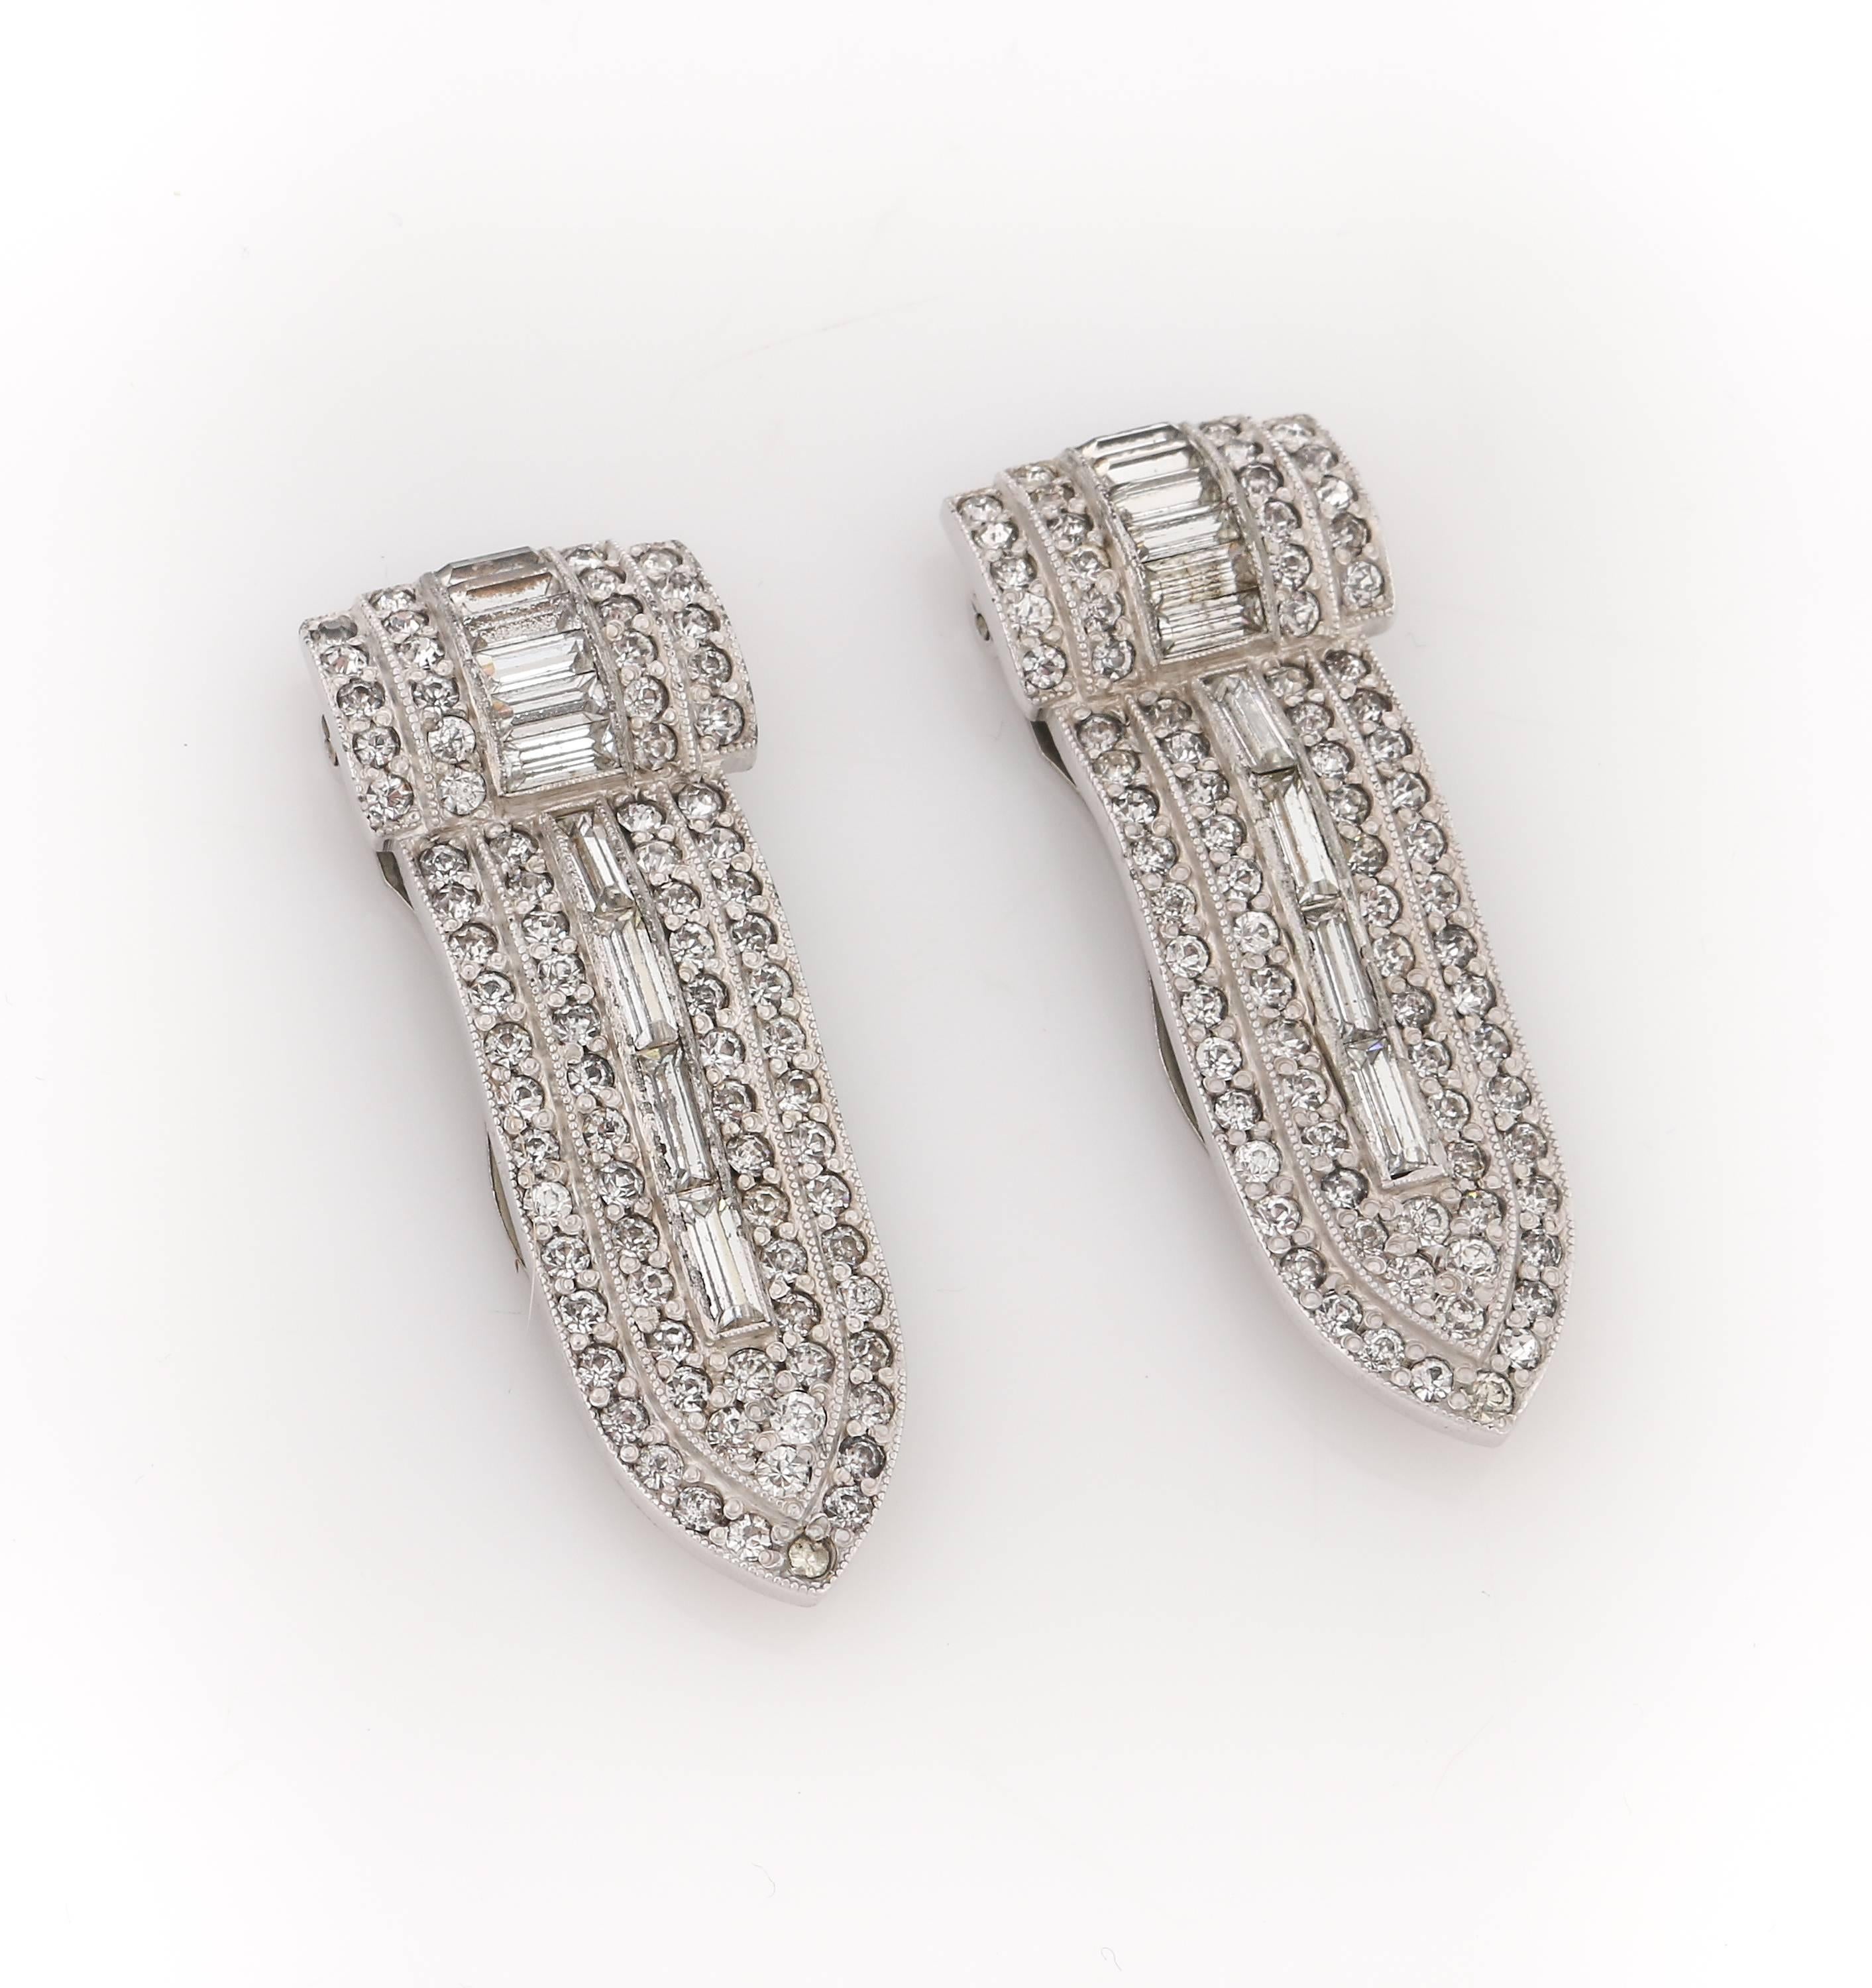 Vintage Art Deco c.1930's two piece palladium silver (over cut steel) diamond-look crystal rhinestone dress / fur clips set. Palladium silver-toned metal pointed oblong shaped setting with two rows of paved set round crystal rhinestones surrounding